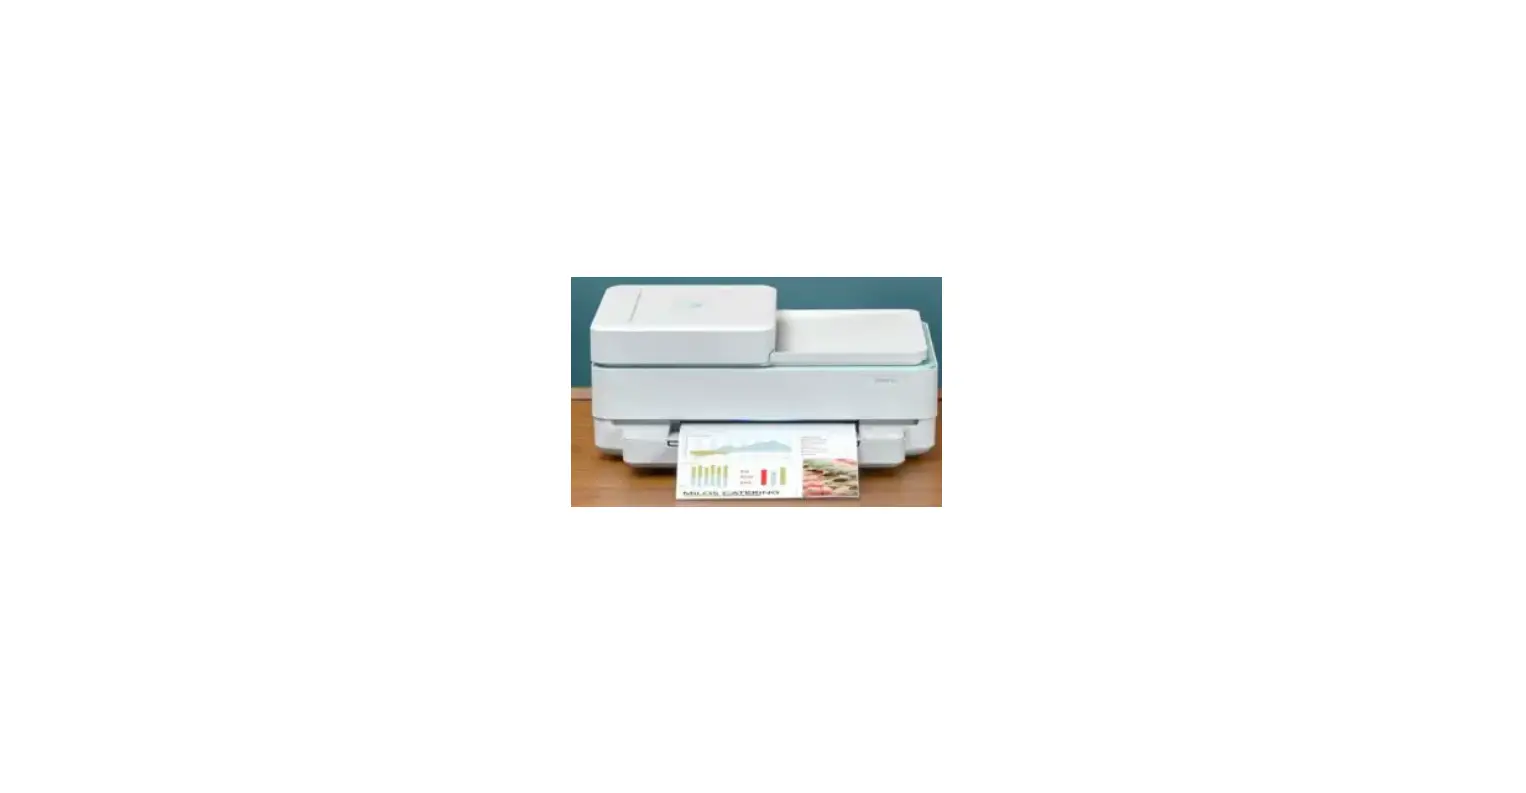 HP ENVY Pro All-in-One Photo Printer [6020, 6420, 5020 ....] Catalog - Manualsnap